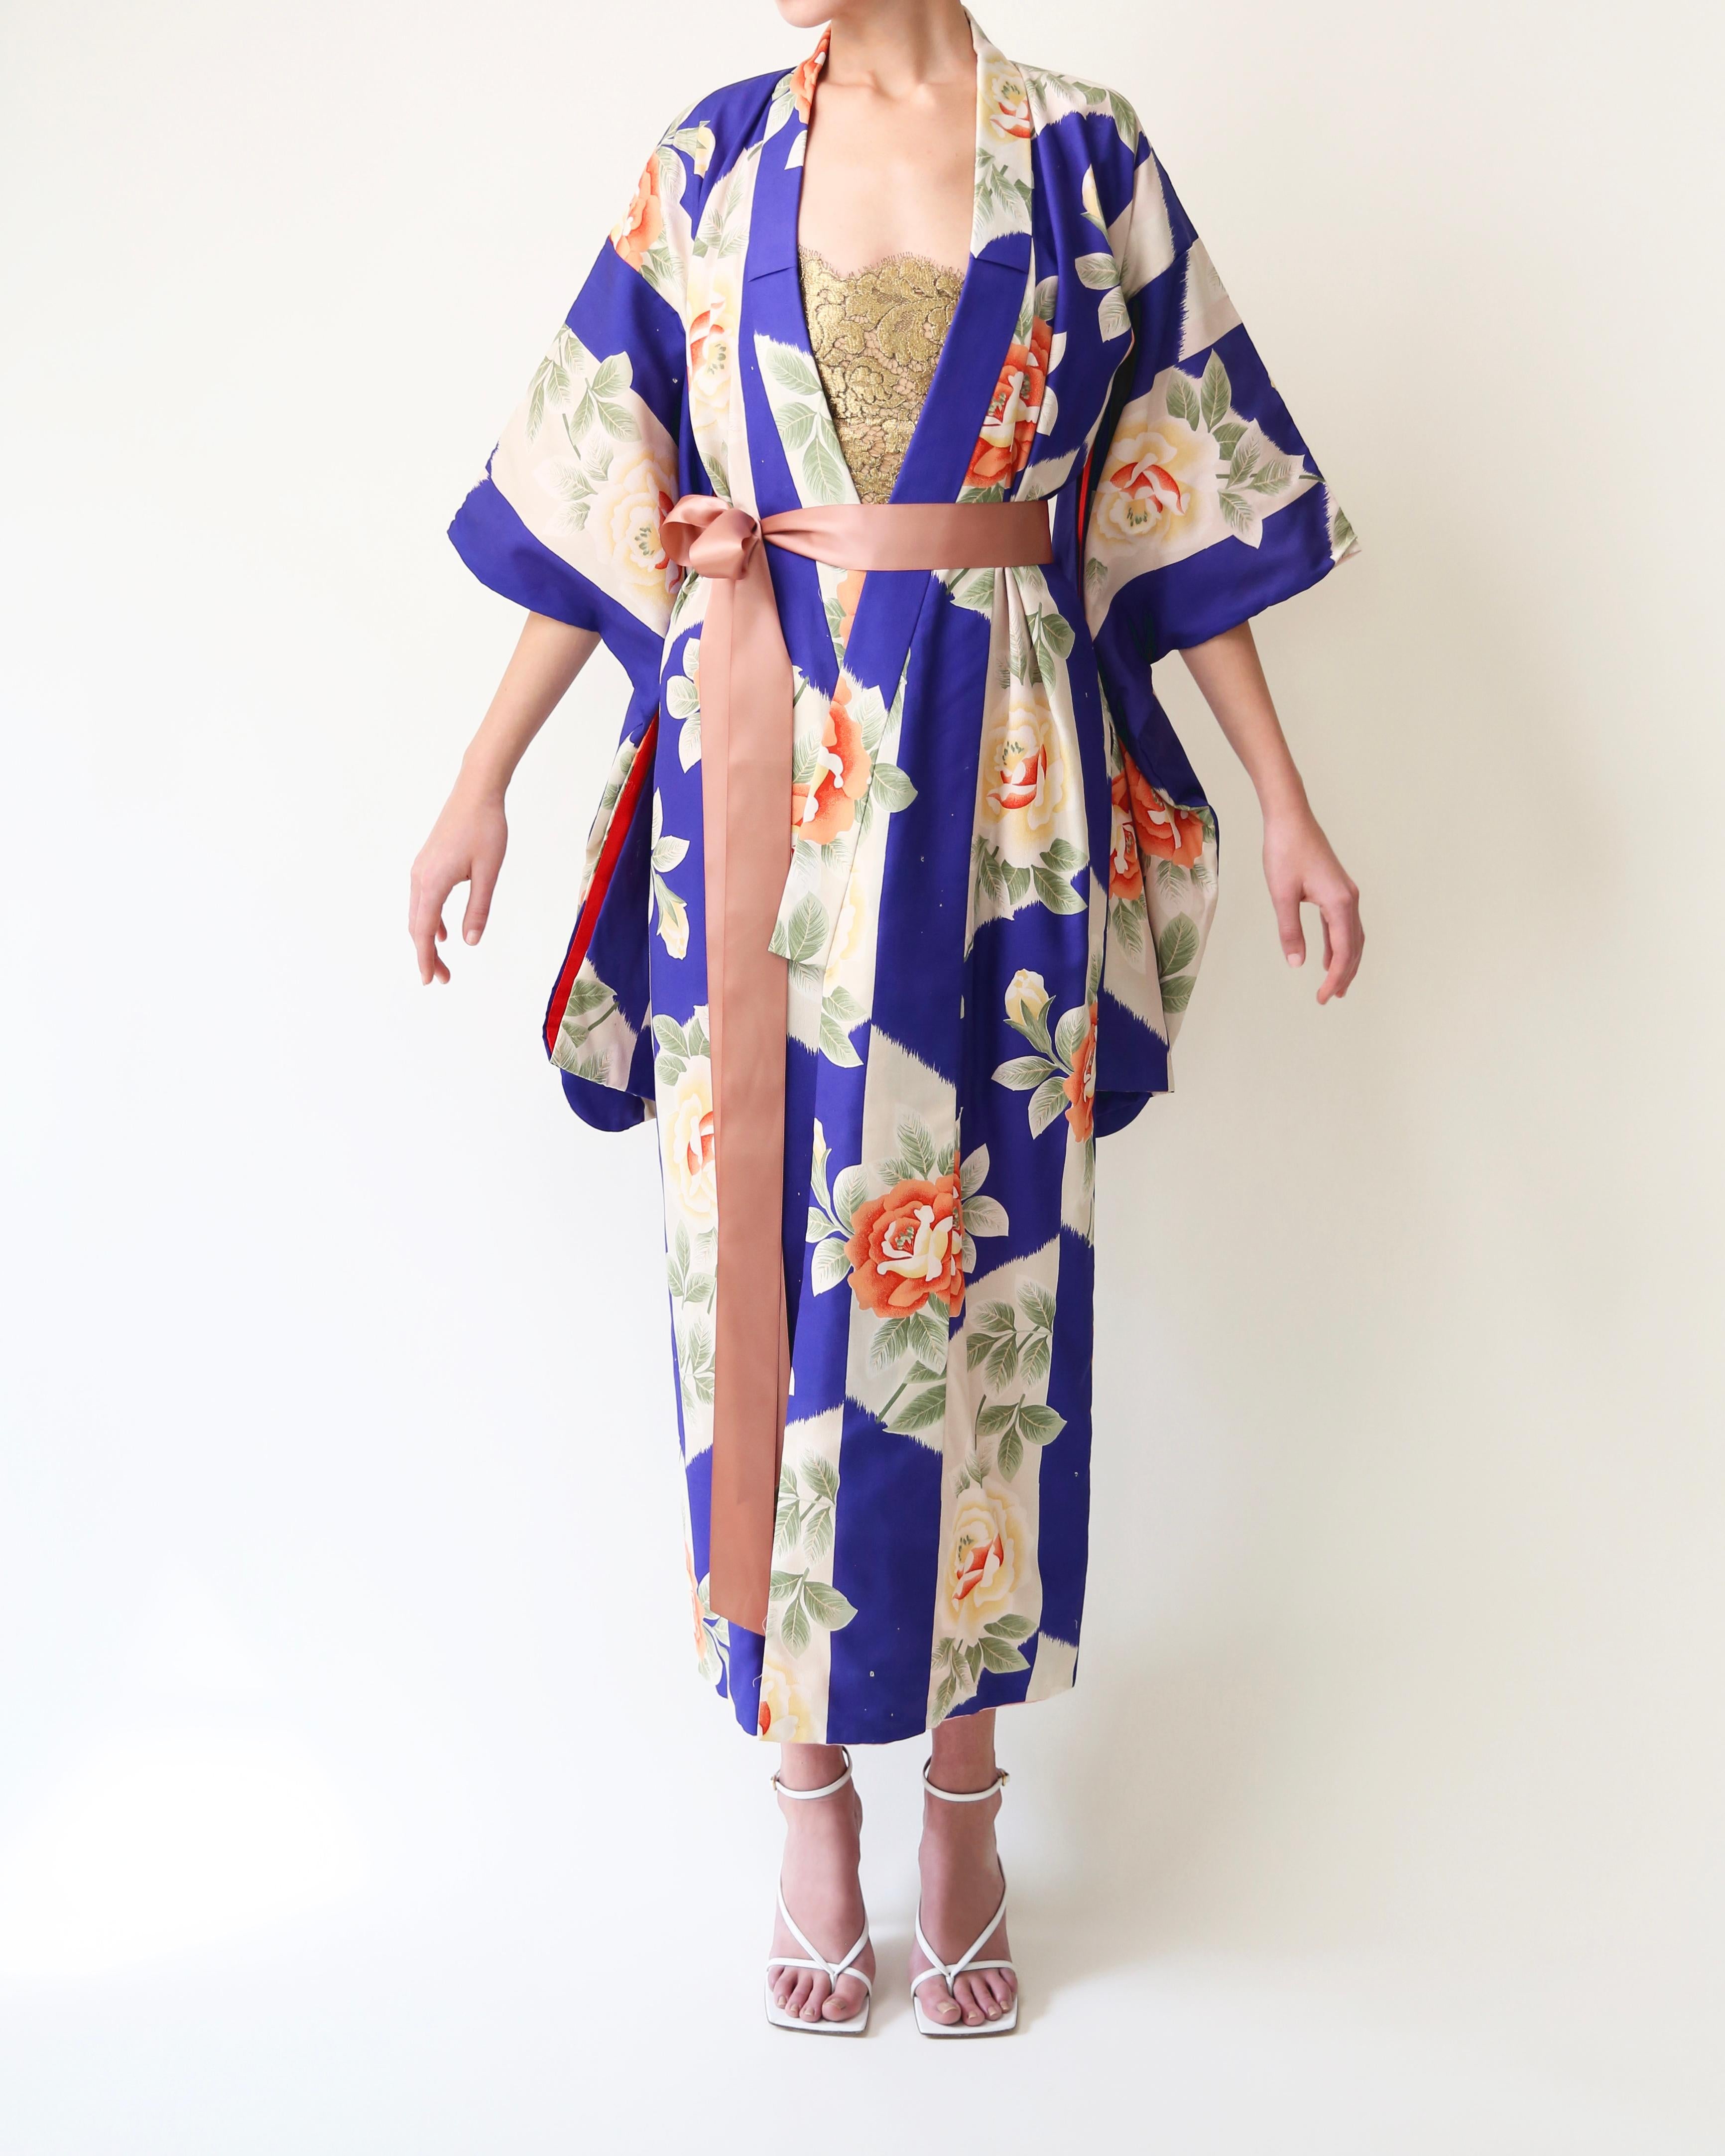 LOVE LALI VINTAGE 

Vintage Japanese kimono
Handmade in Japan 
Floor length
Bright blue with beautiful orange and red rose print
Comes with a blush pink silk ribbon that gives you the option to wear this open or closed 
Lined in red and and pale